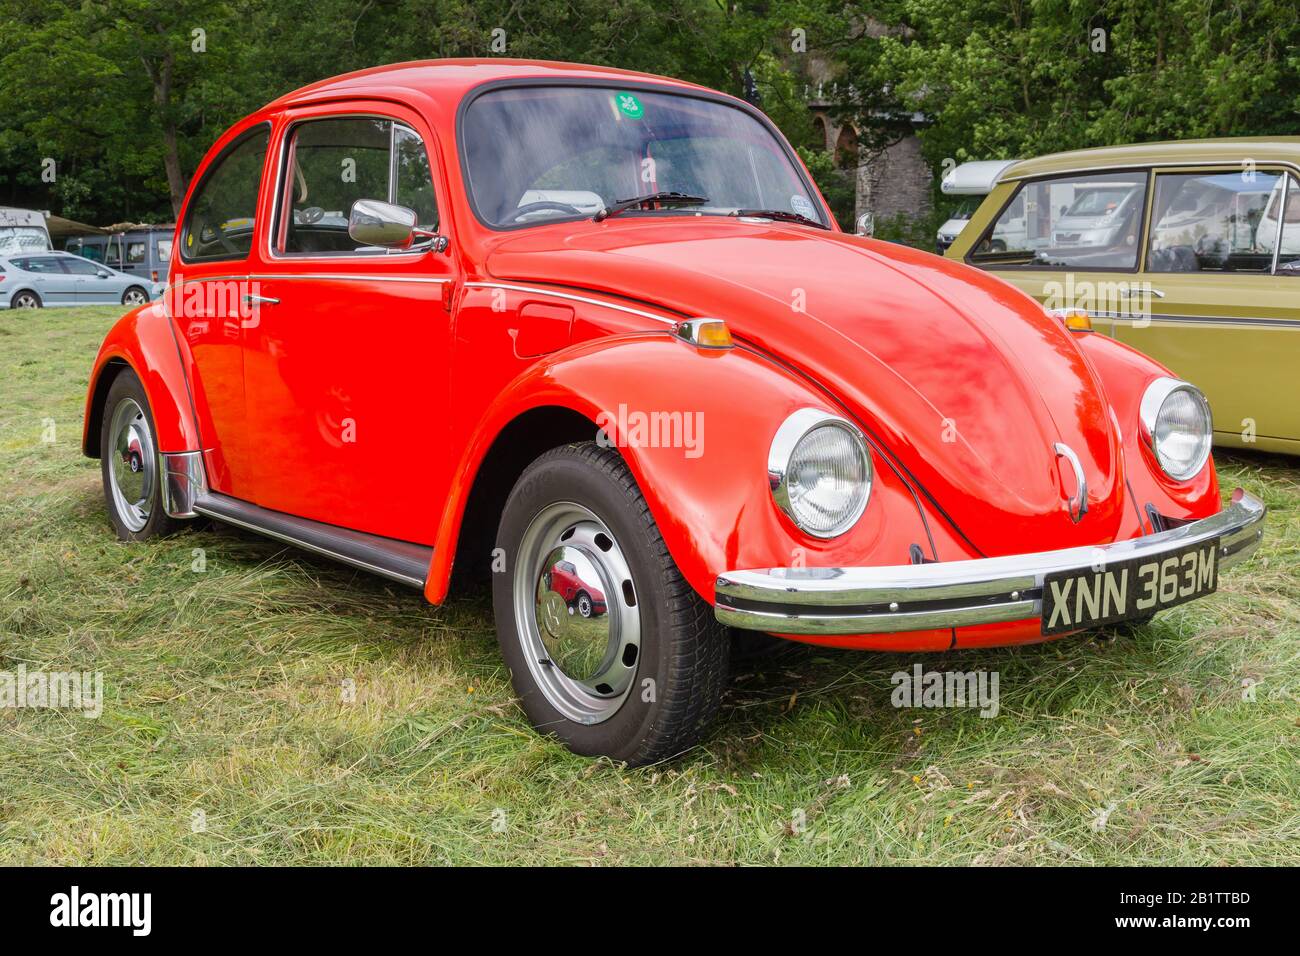 Volkswagen Type 1 or Beetle a classic German  economy car built from 1938 to 2003 at a vintage vehicle rally Stock Photo